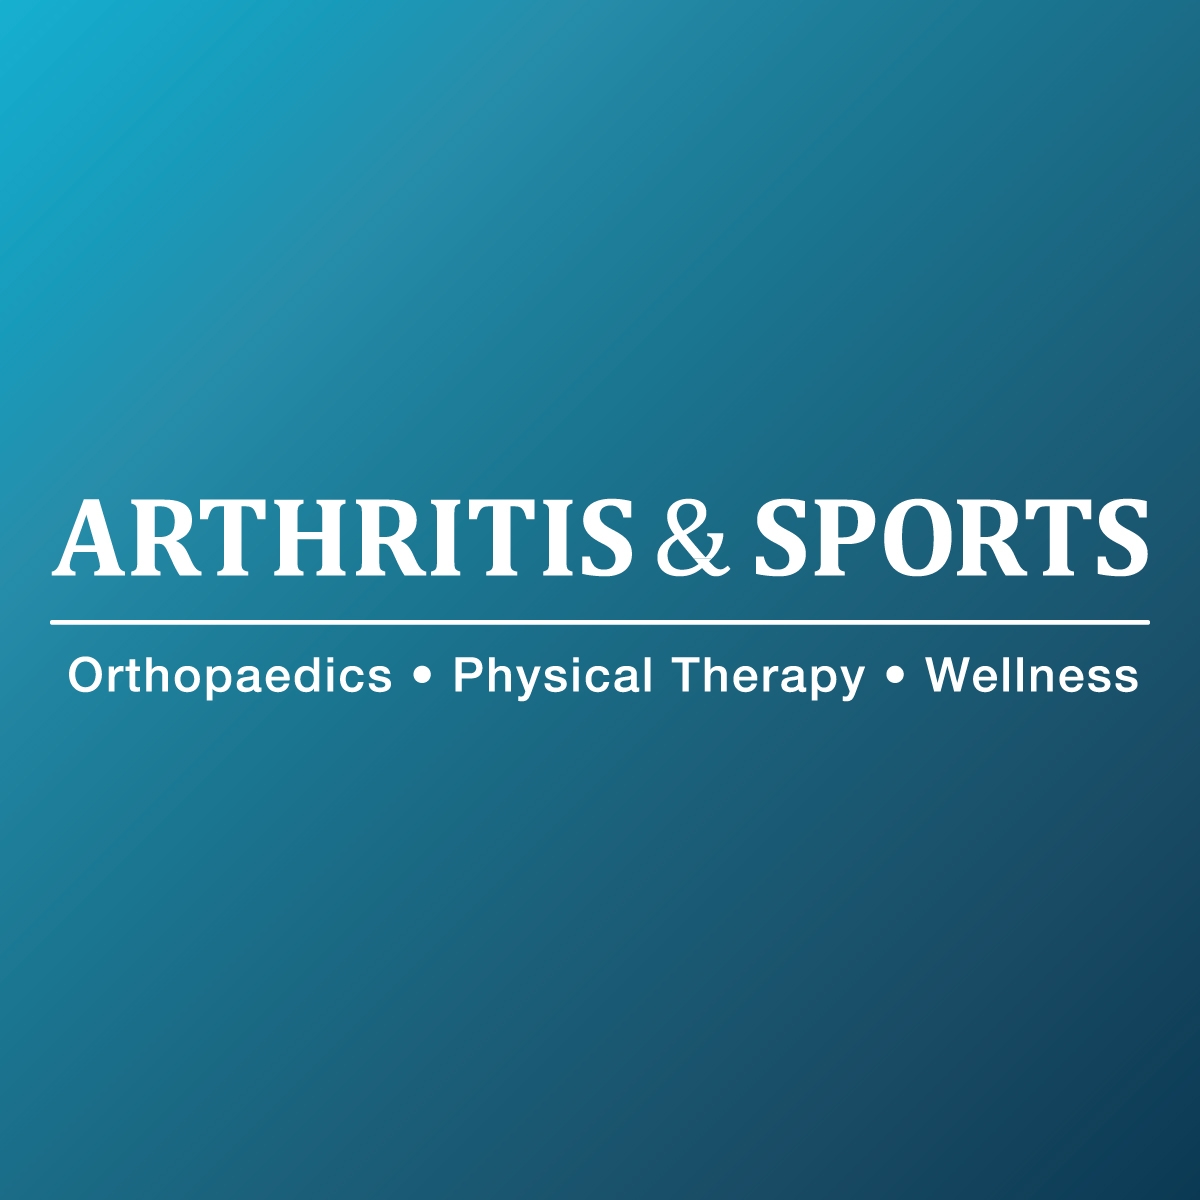 Arthritis & Sports | Orthopedics, Physical Therapy & Wellness Affirms the Importance of Laser Therapy